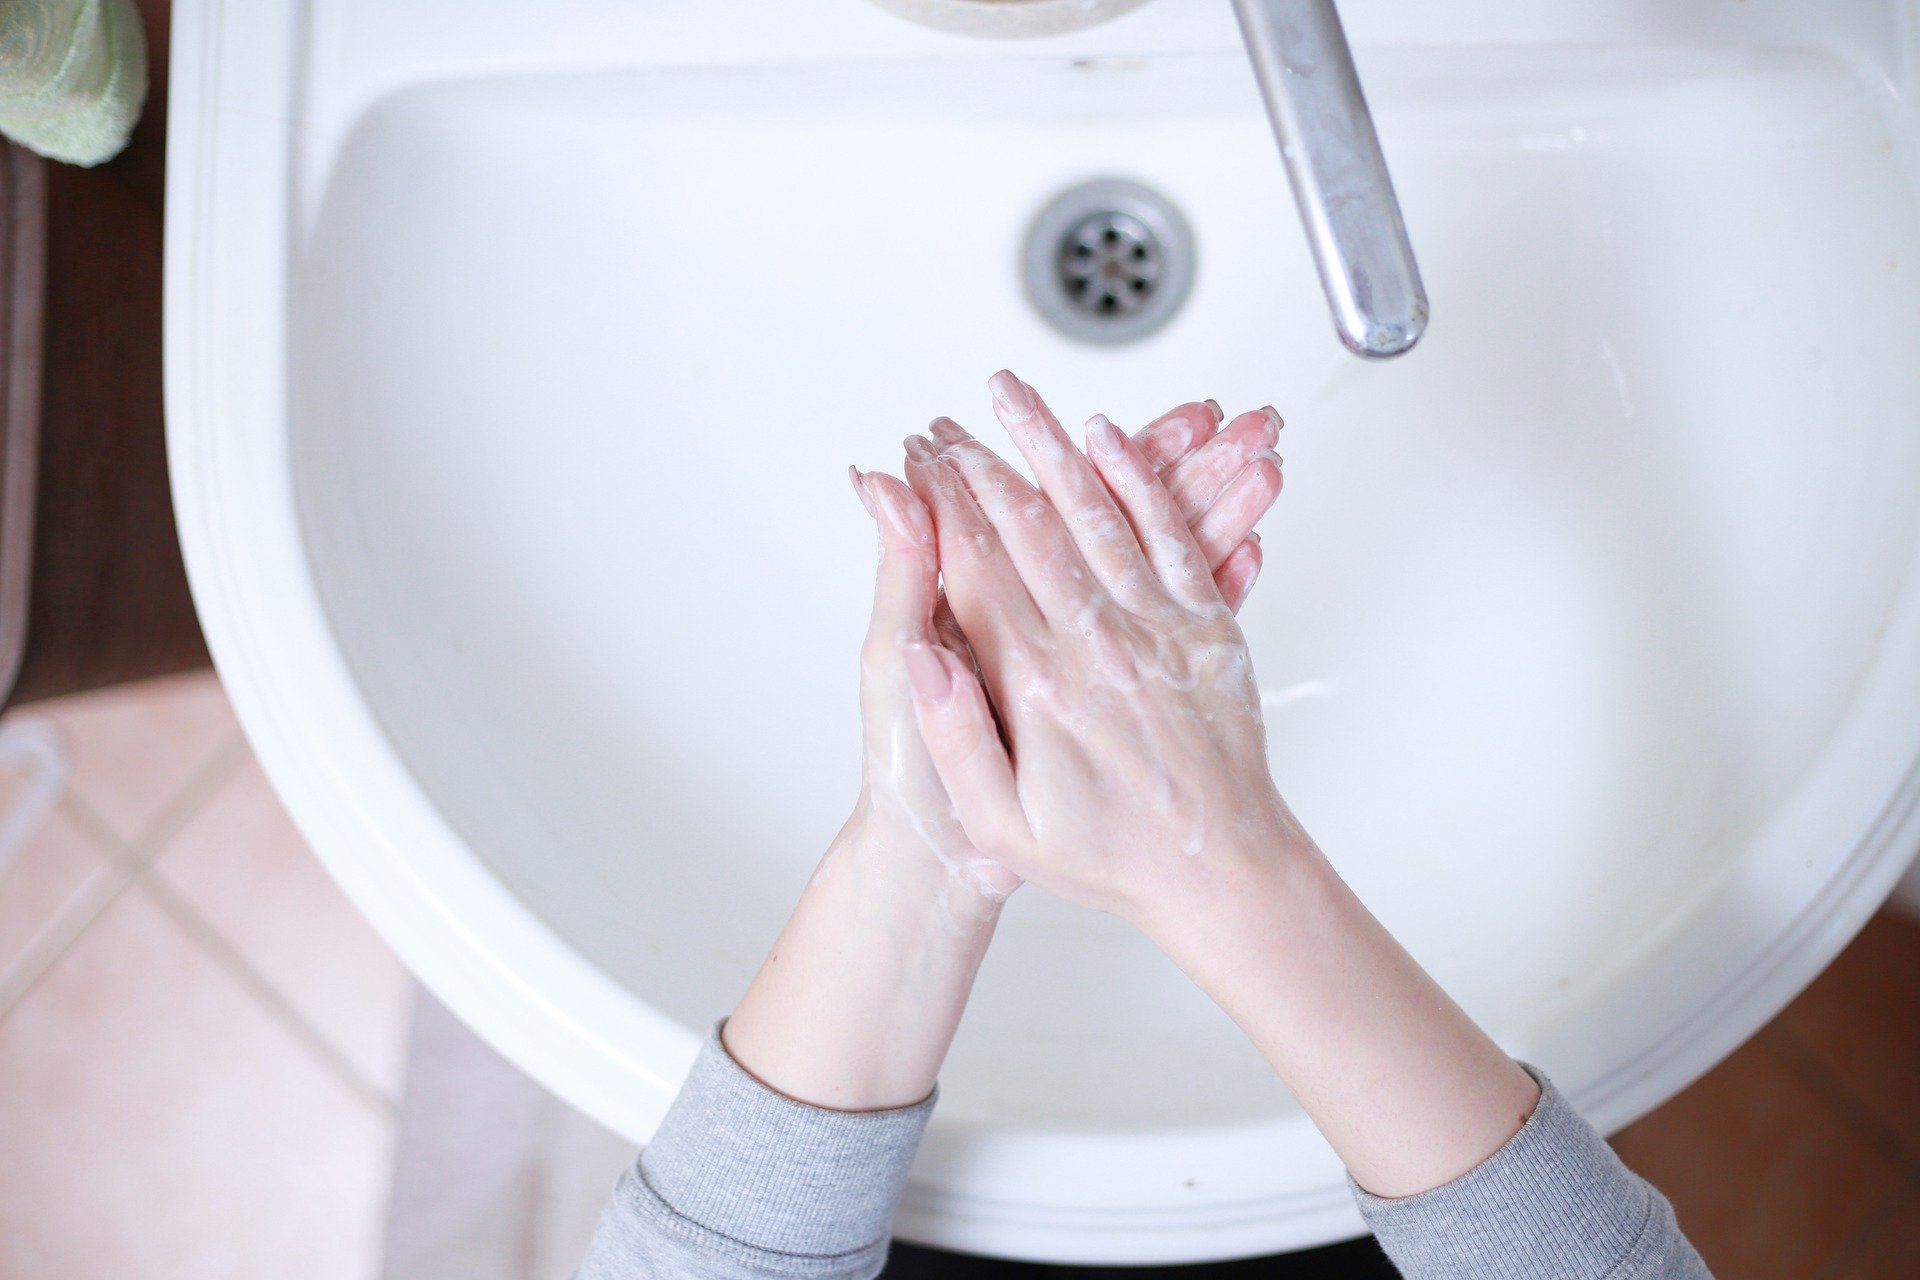 Woman washing her hands to stop the spread of viruses.